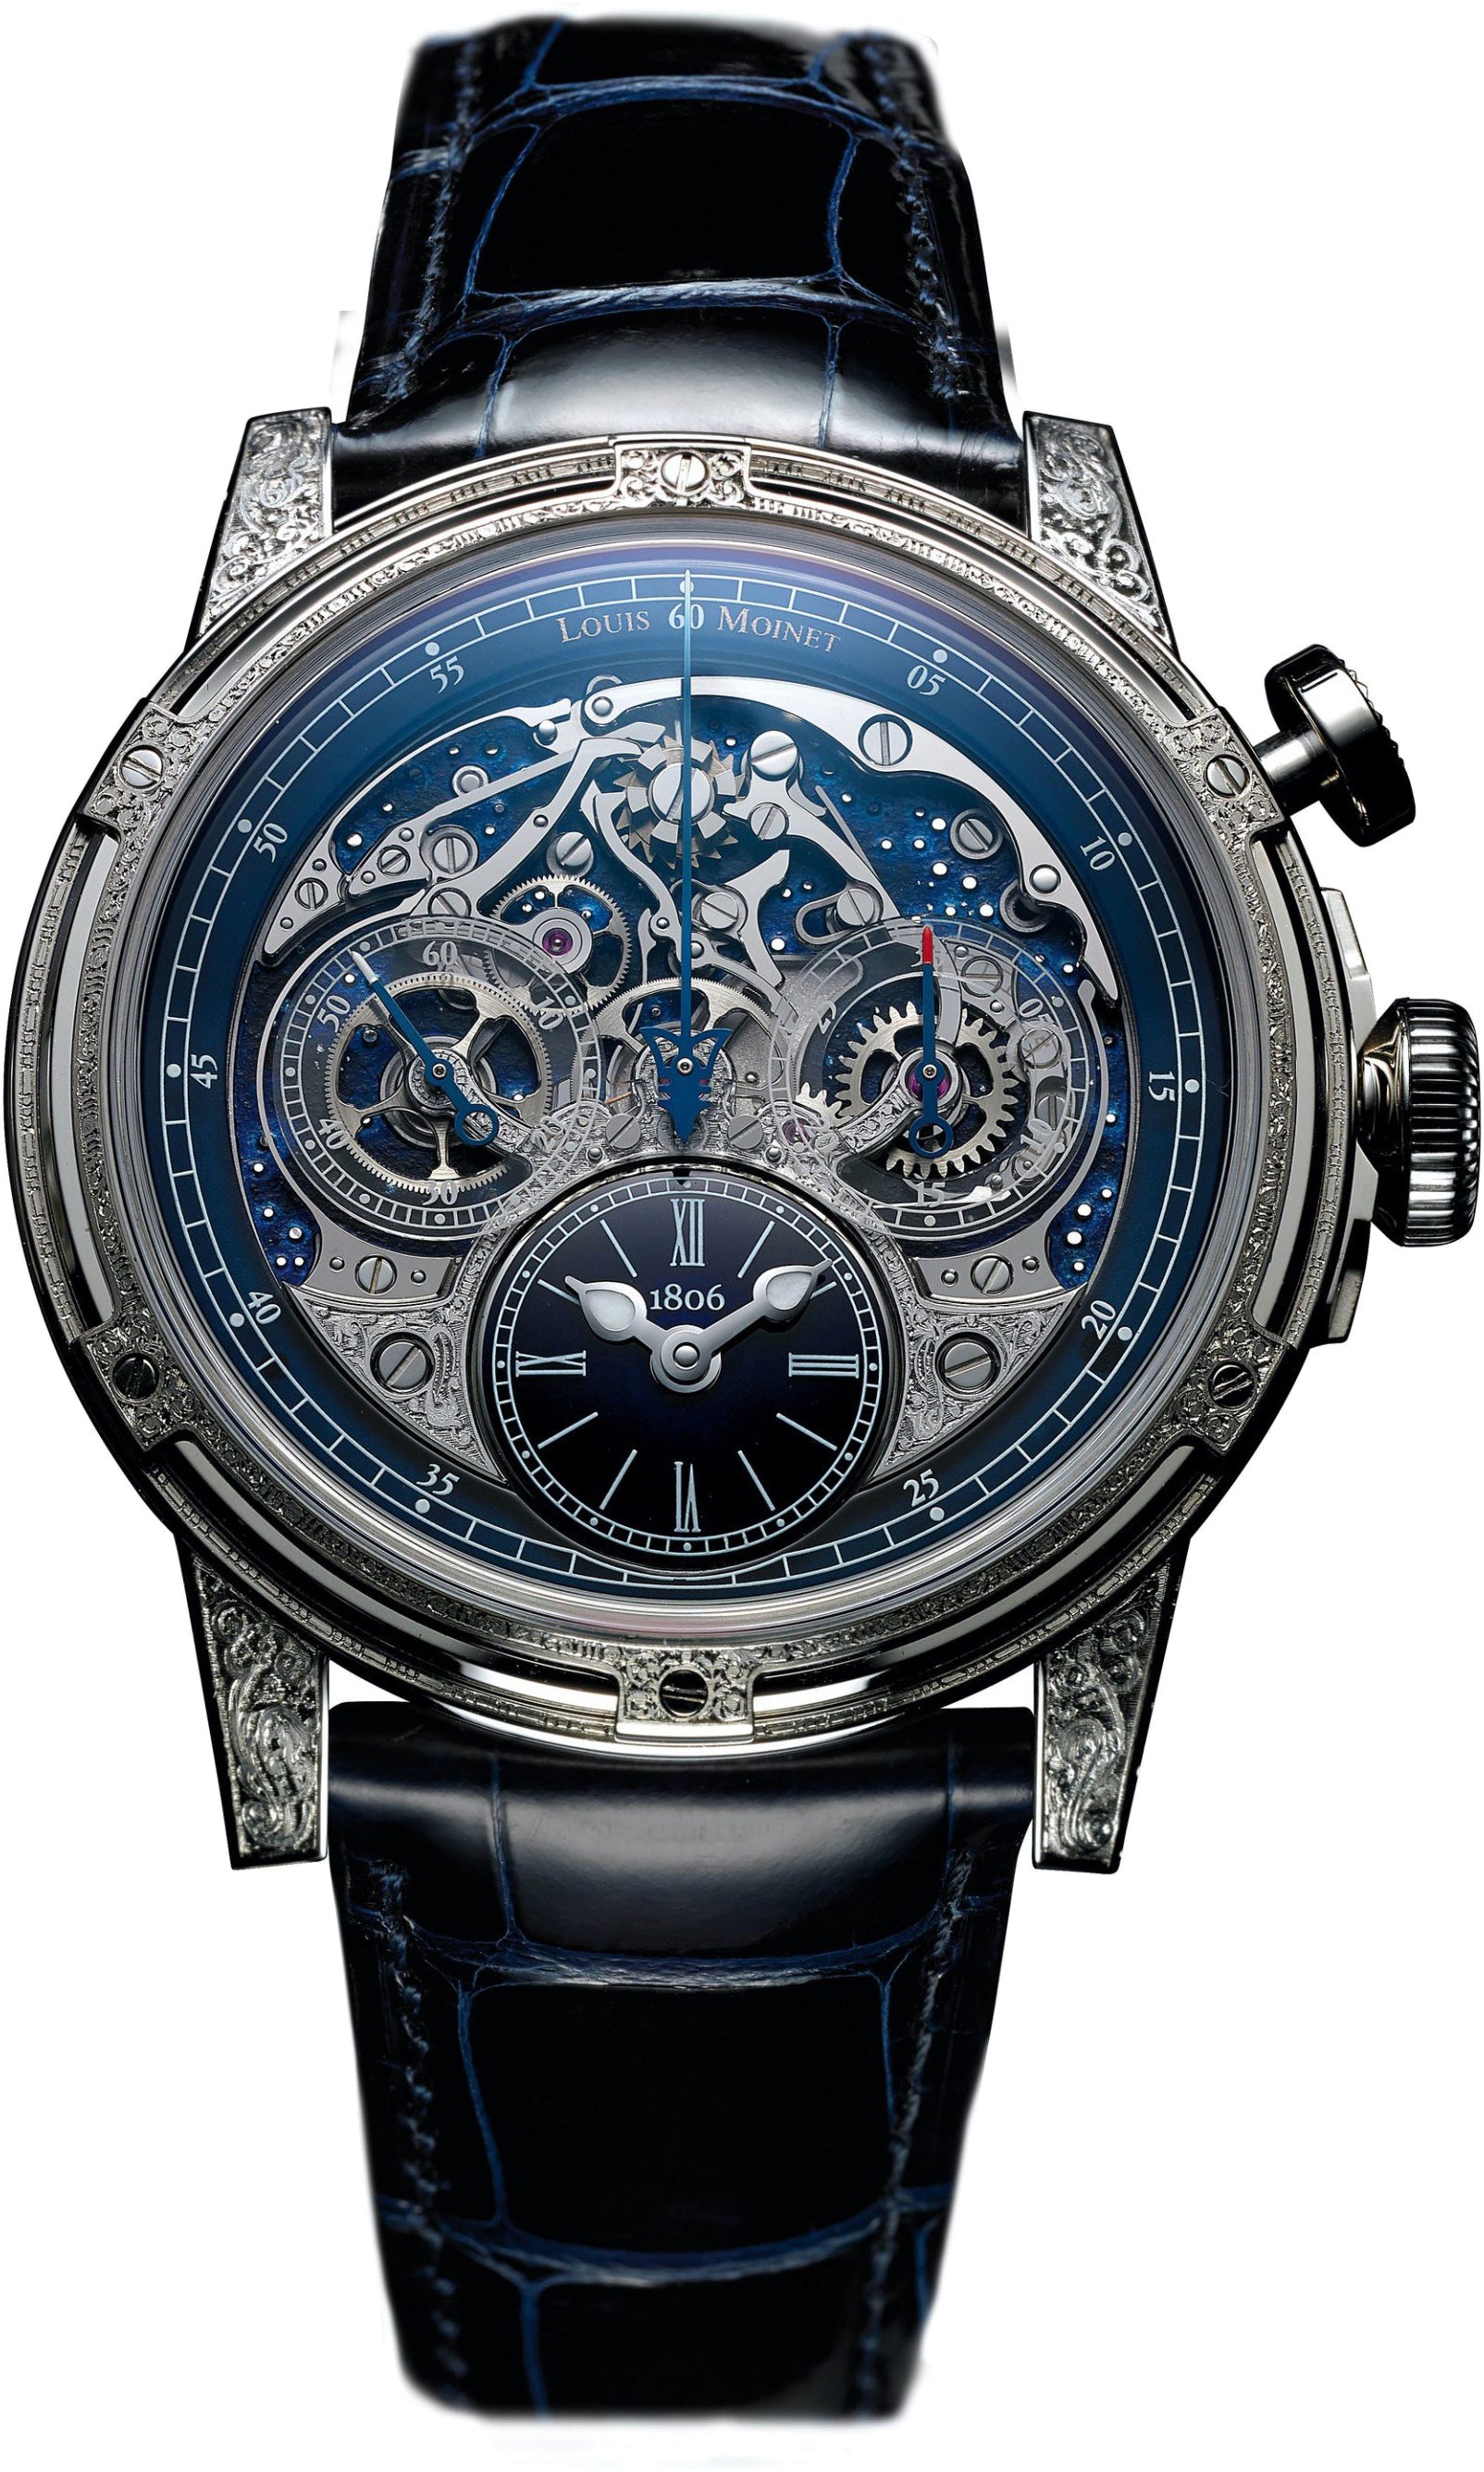 Louis Moinet Watch Memoris Red Eclipse White Gold Hand Engraved Limited Edition